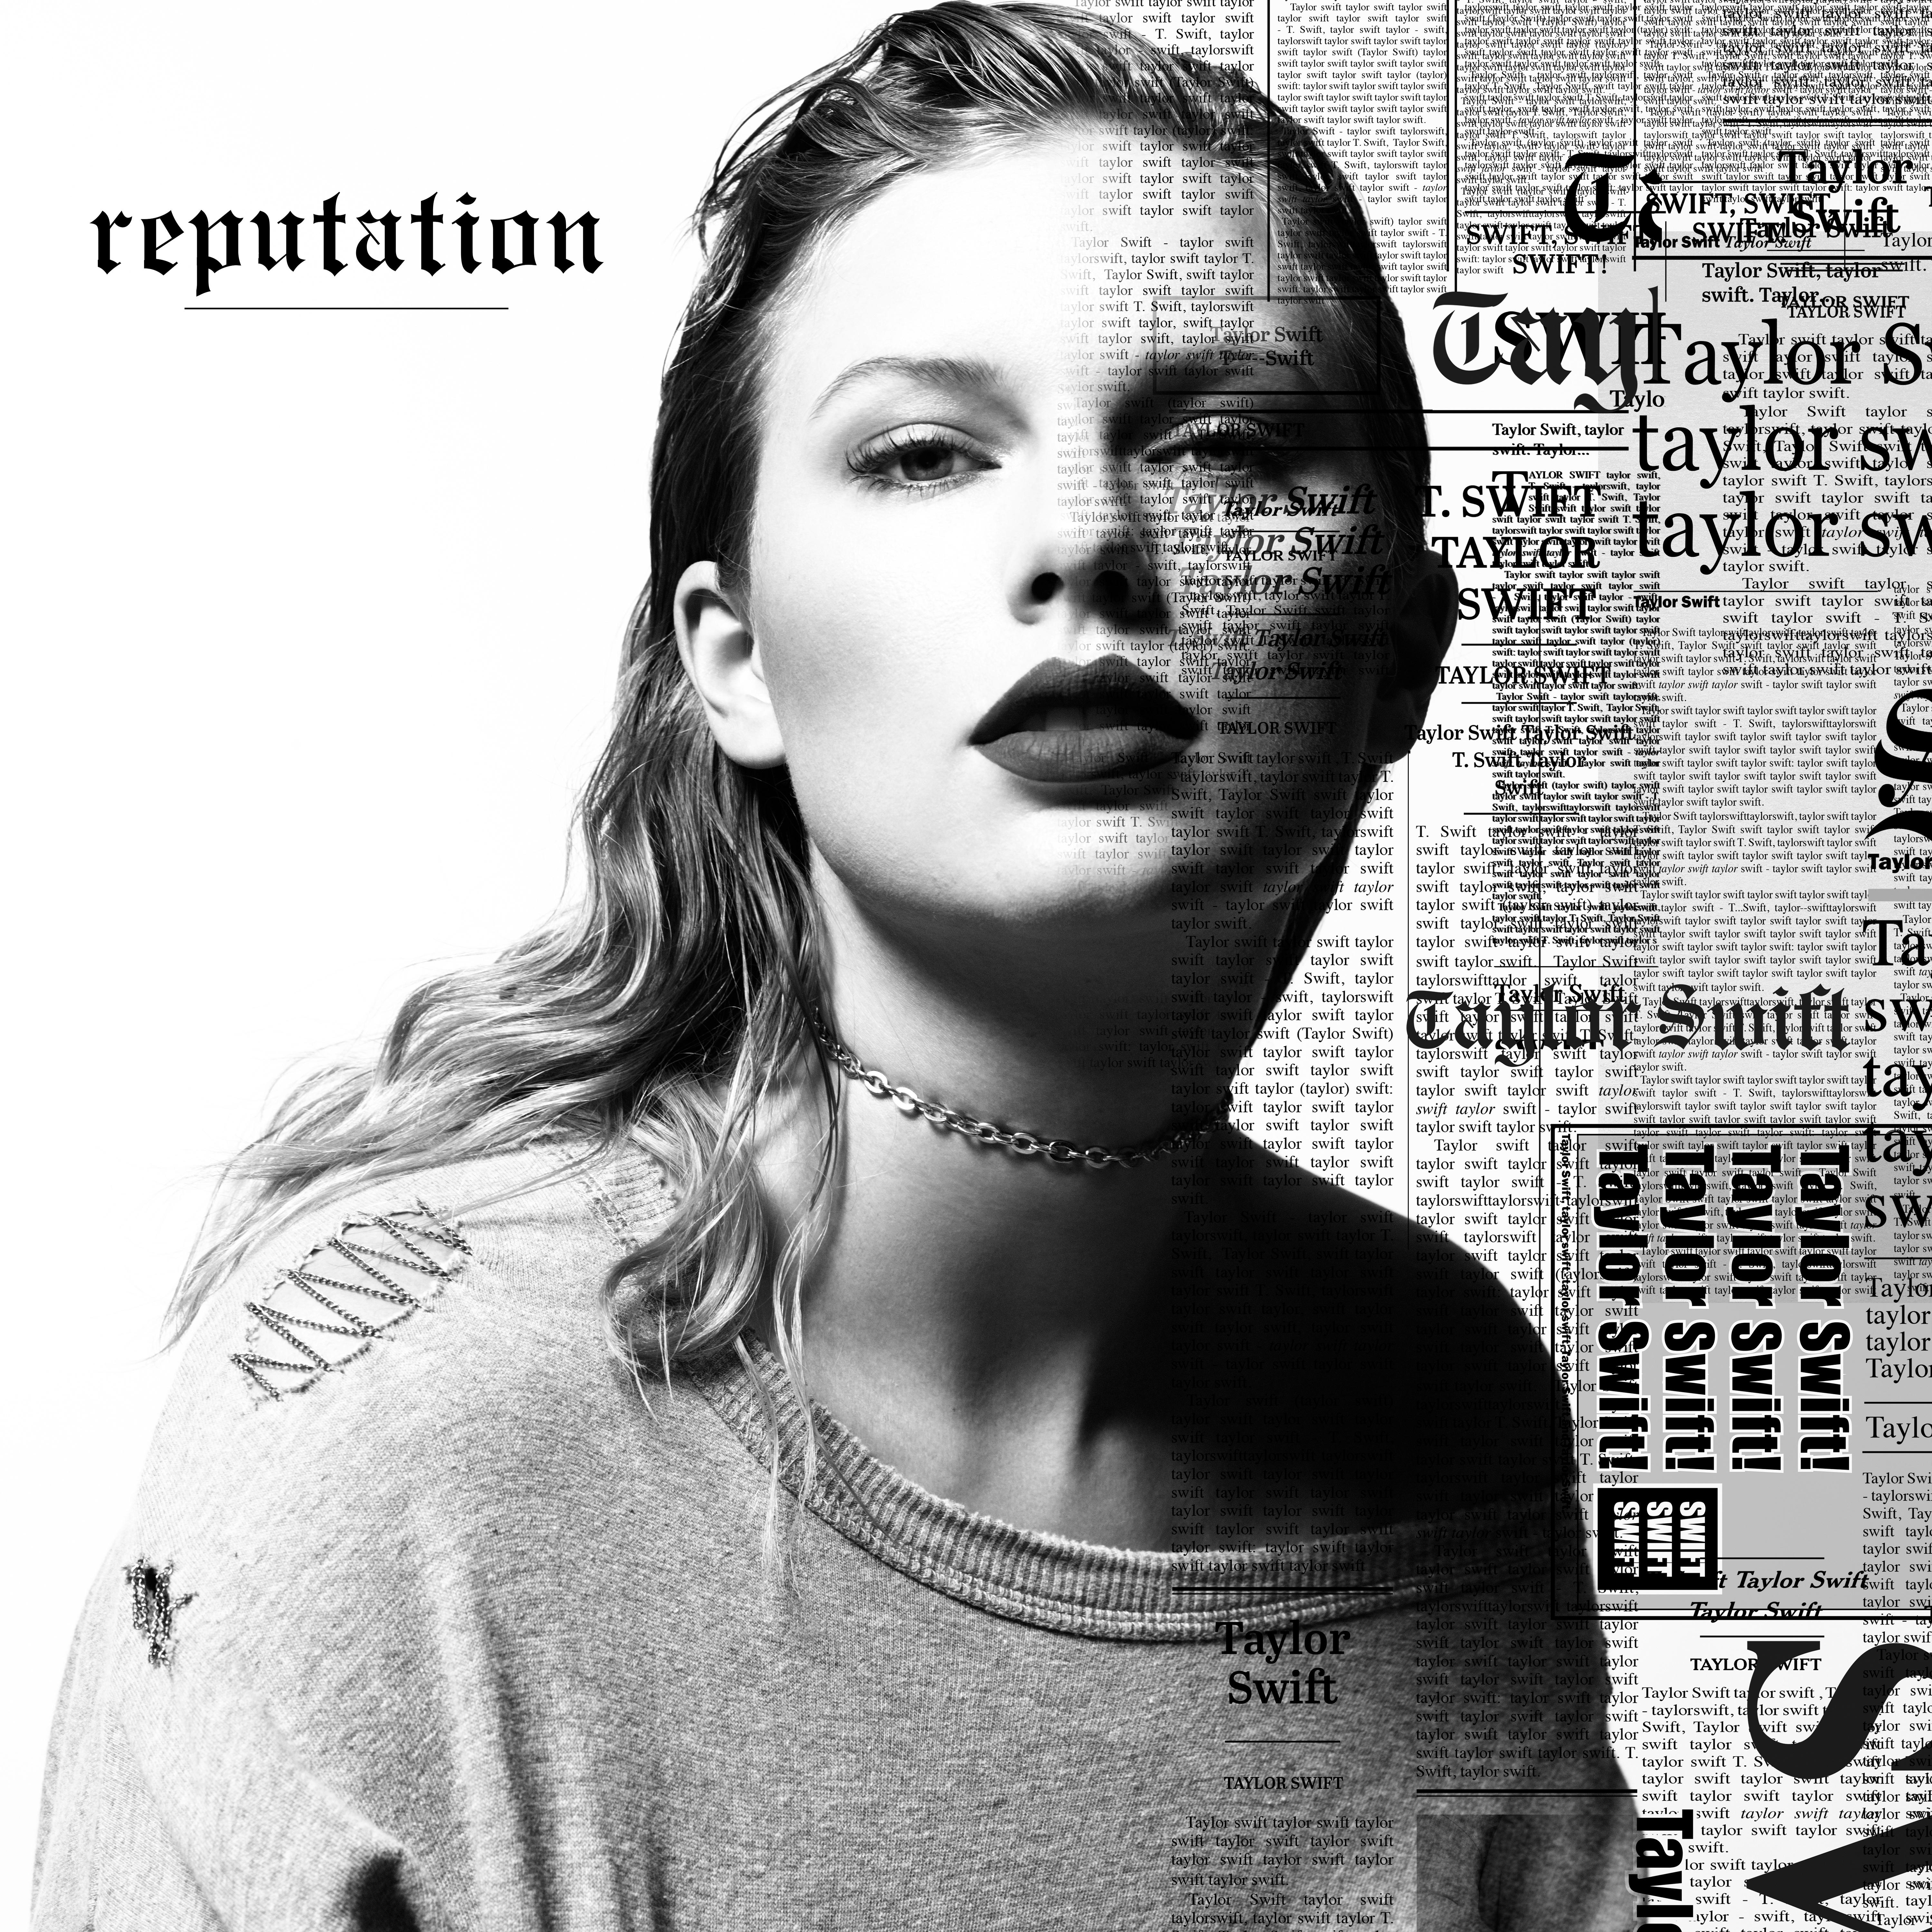 Dancing With Our Hands Tied歌词 歌手Taylor Swift-专辑reputation-单曲《Dancing With Our Hands Tied》LRC歌词下载